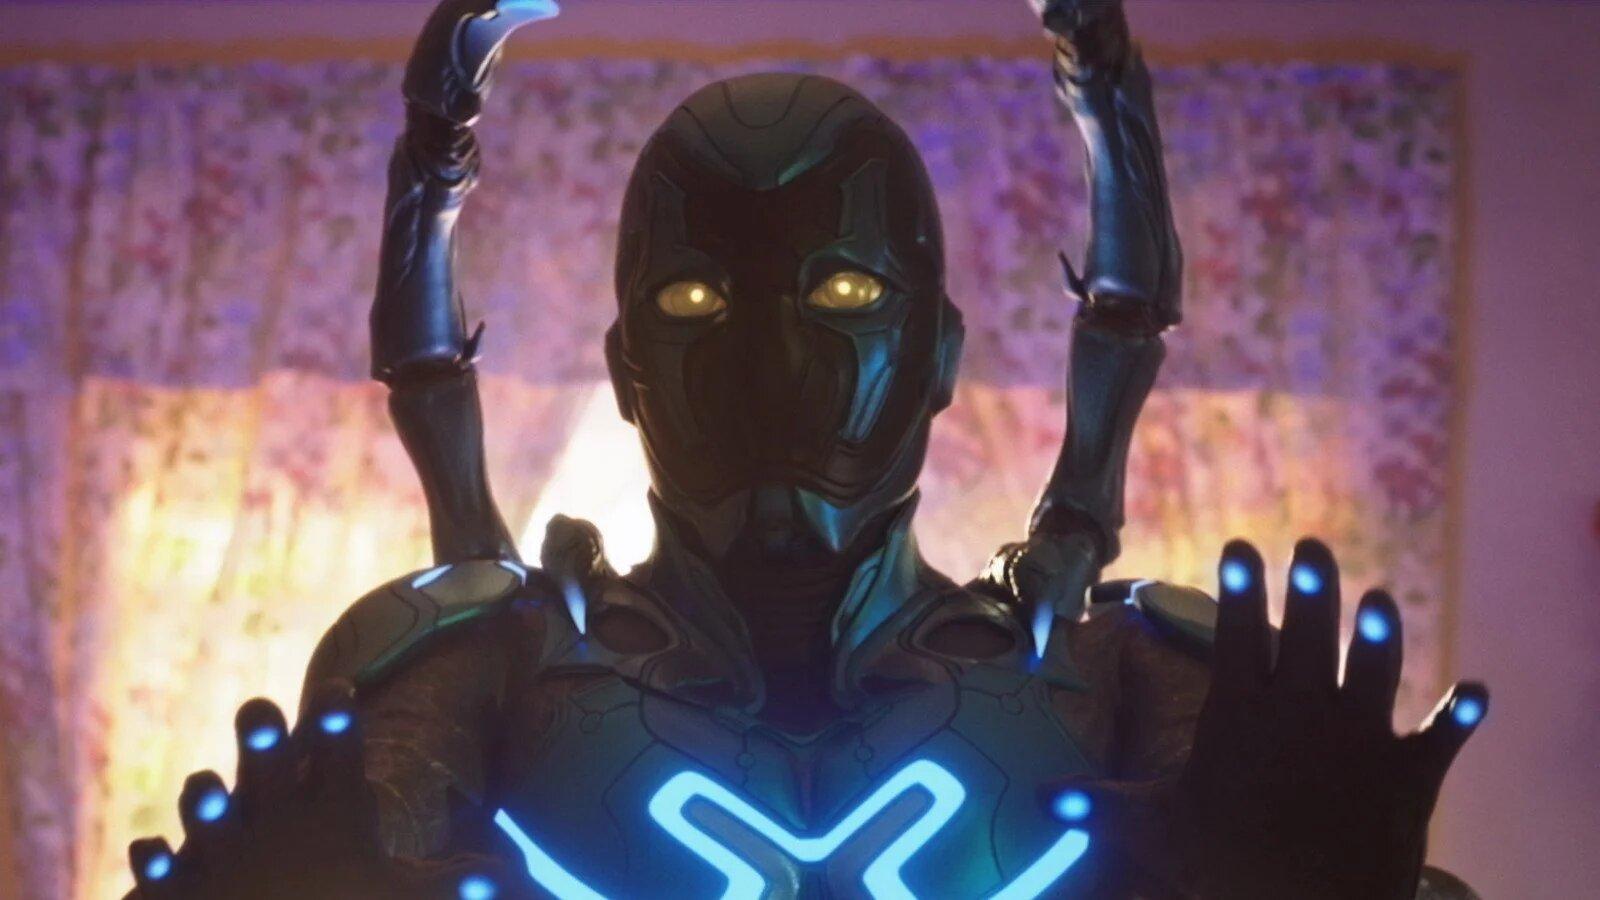 DC Films - 'Blue Beetle' will end the current DCEU as